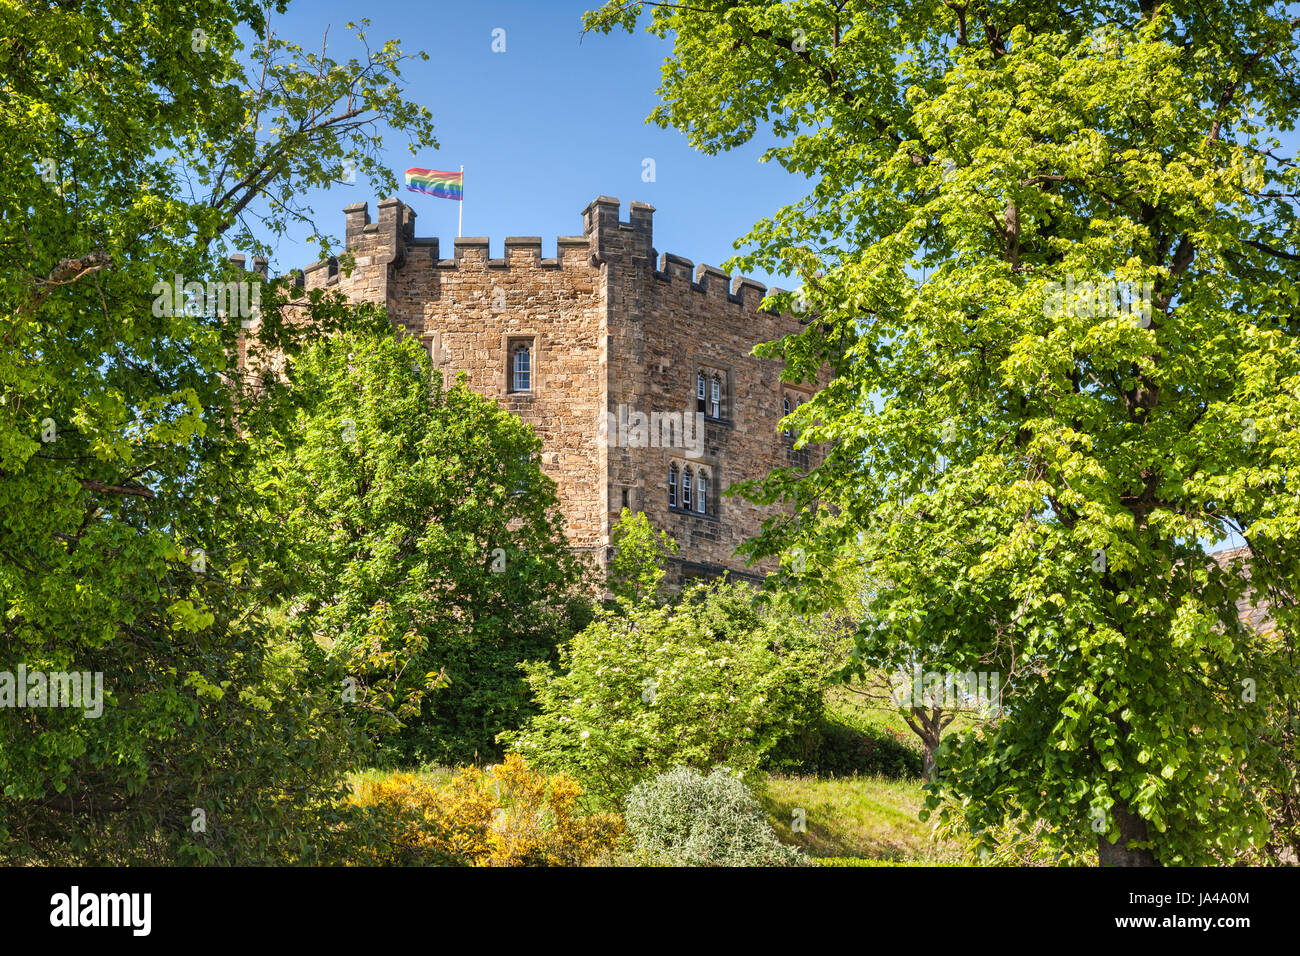 The old keep of Durham Castle, now part of Durham University, surrounded by trees in full leaf. Stock Photo